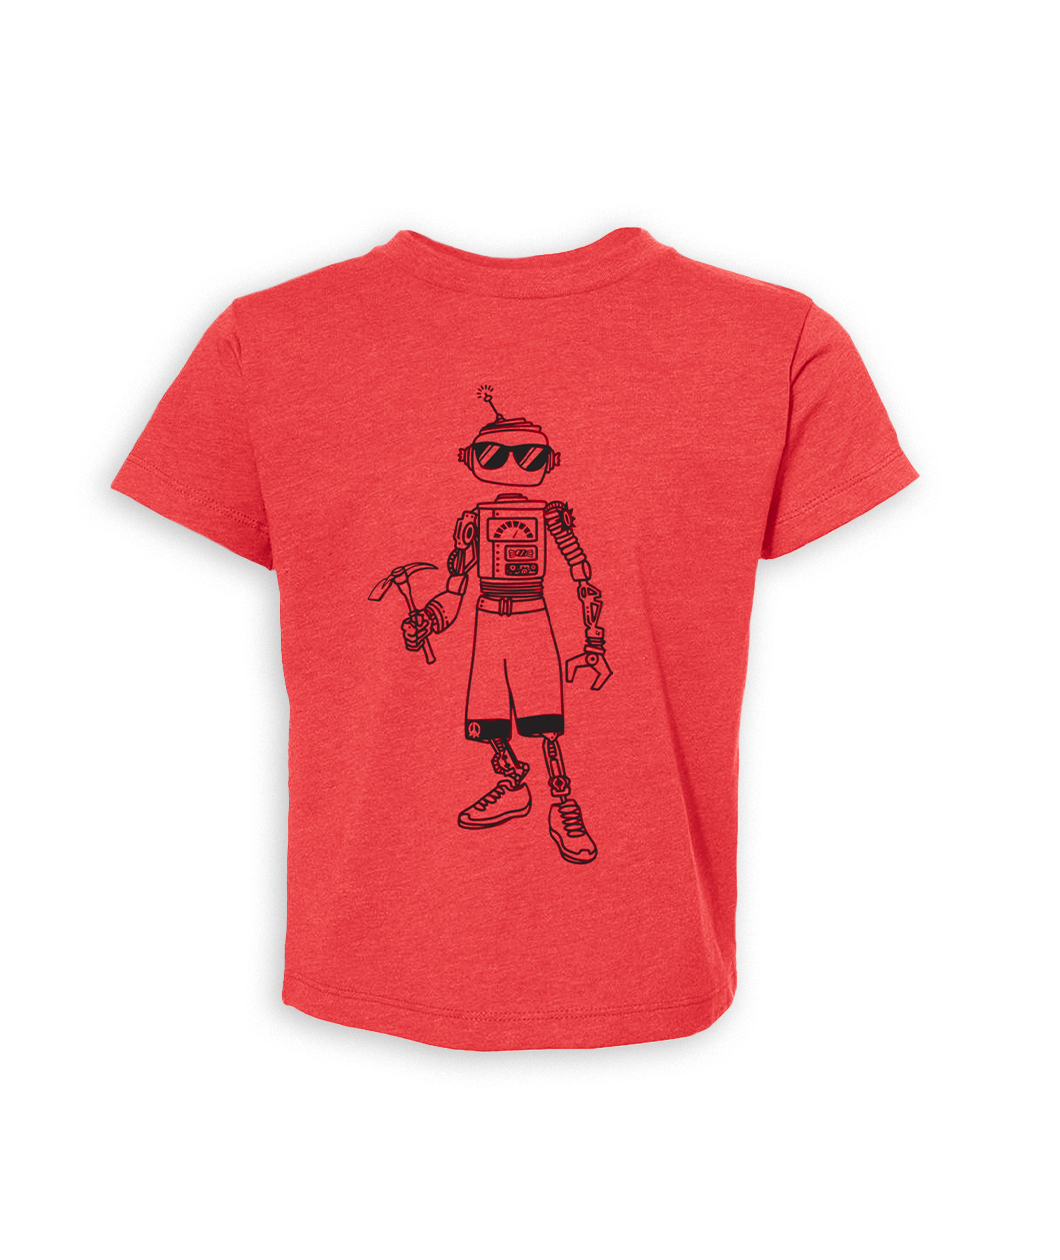 Courtney Dauwalter Robot, Robot, Robot Kids Shirt in Heather Red. Has black line drawing illustration of a robot on the front of the shirt.